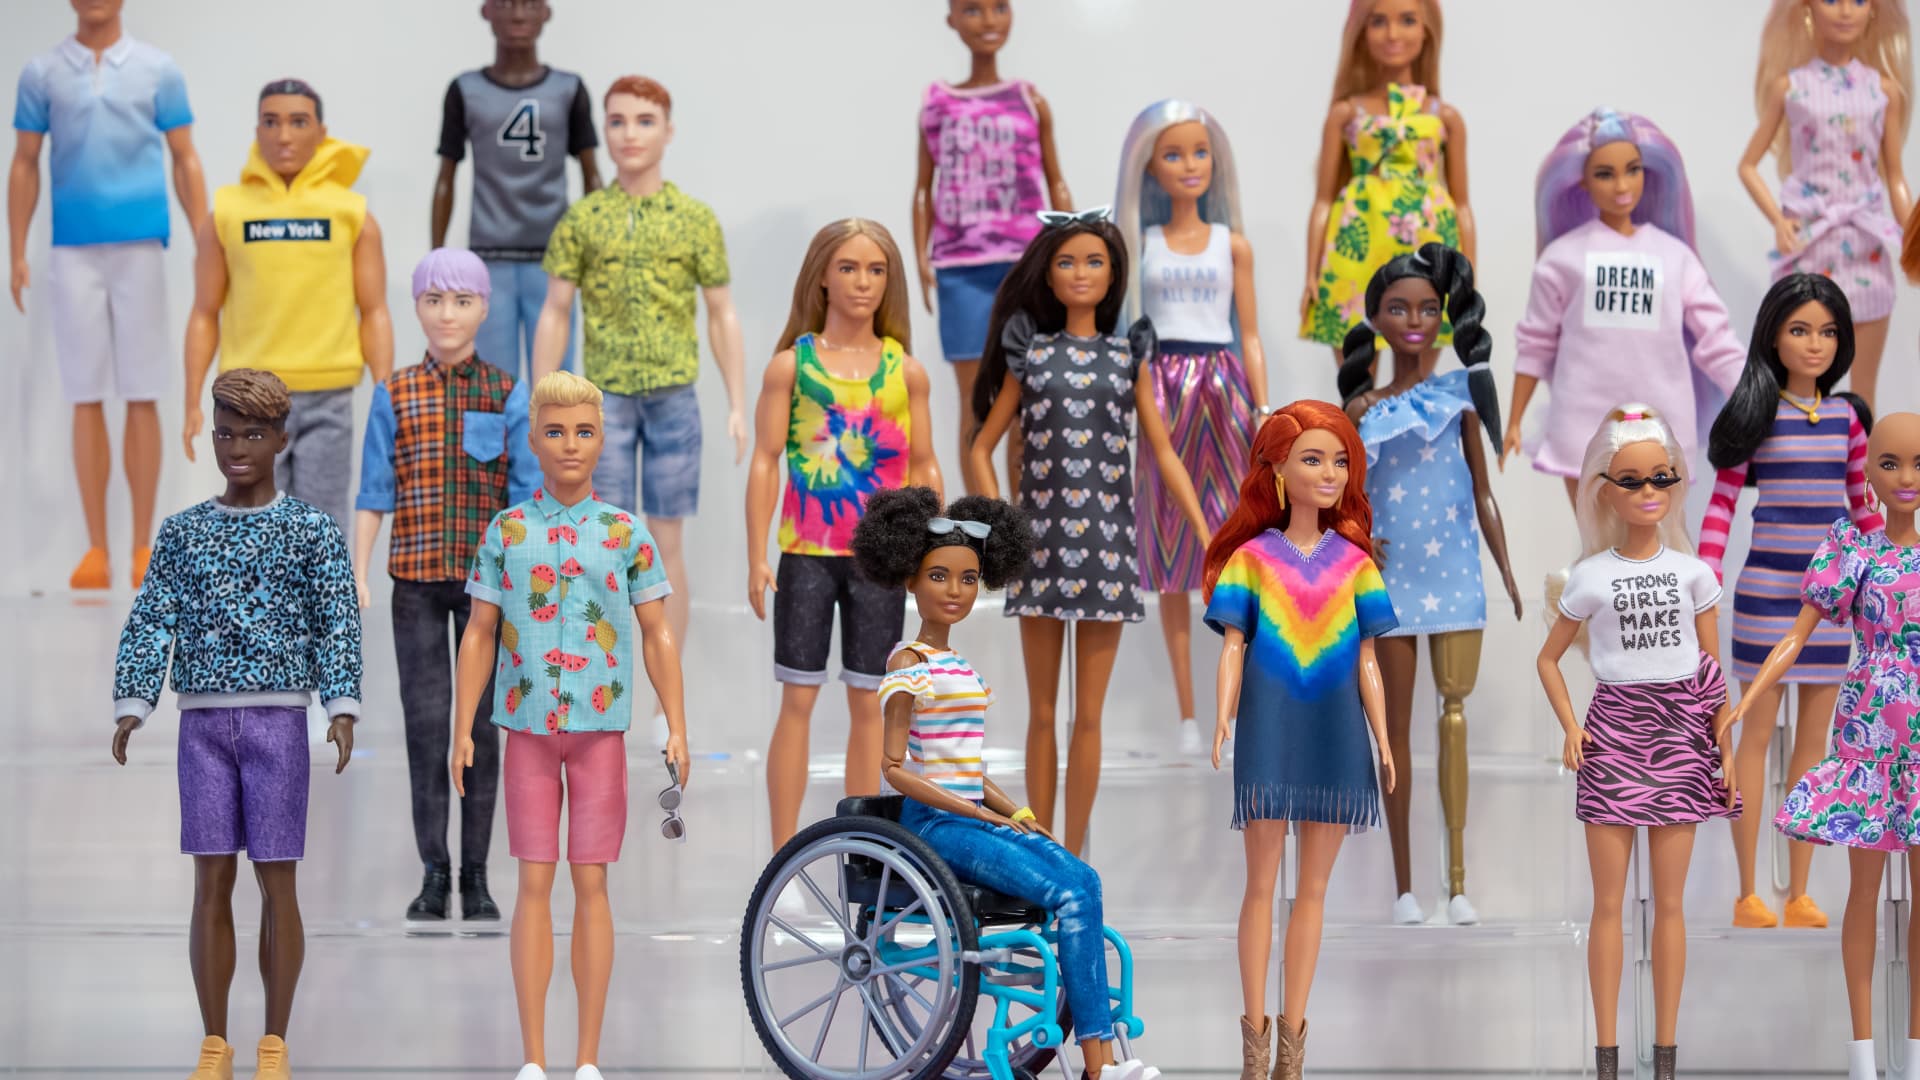 Barbie dolls from the Fashionistas line of the U.S. toy manufacturer Mattel are on display at the company's stand at the International Toy Fair, January 28, 2020 in Bavaria, Nuremberg. 2020.